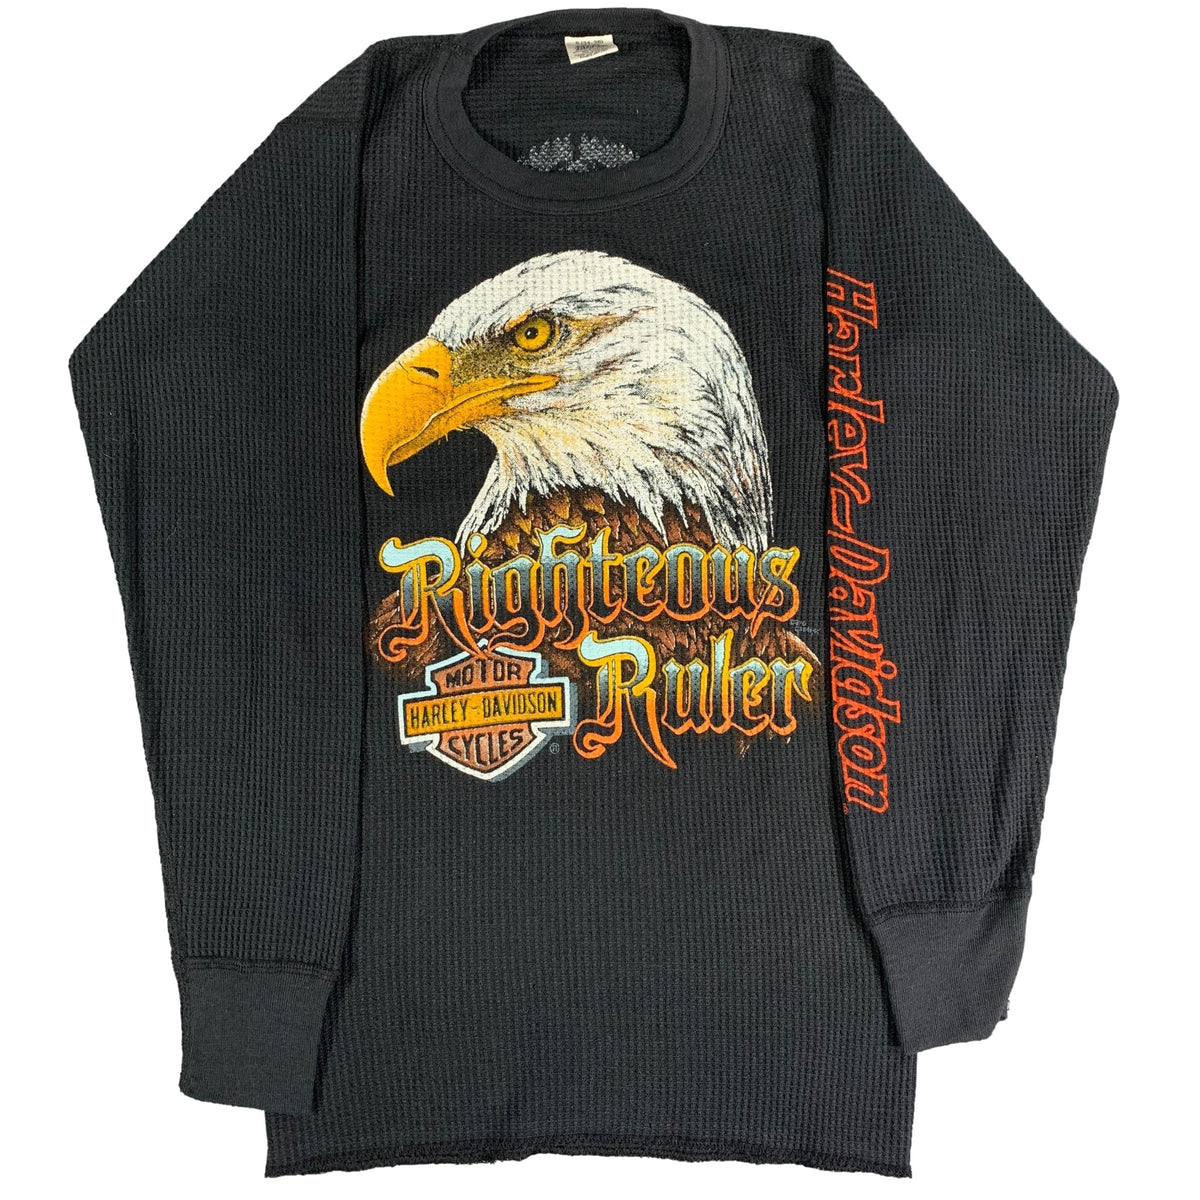 Vintage Harley-Davidson &quot;Righteous Ruler&quot; Thermal Shirt - jointcustodydc